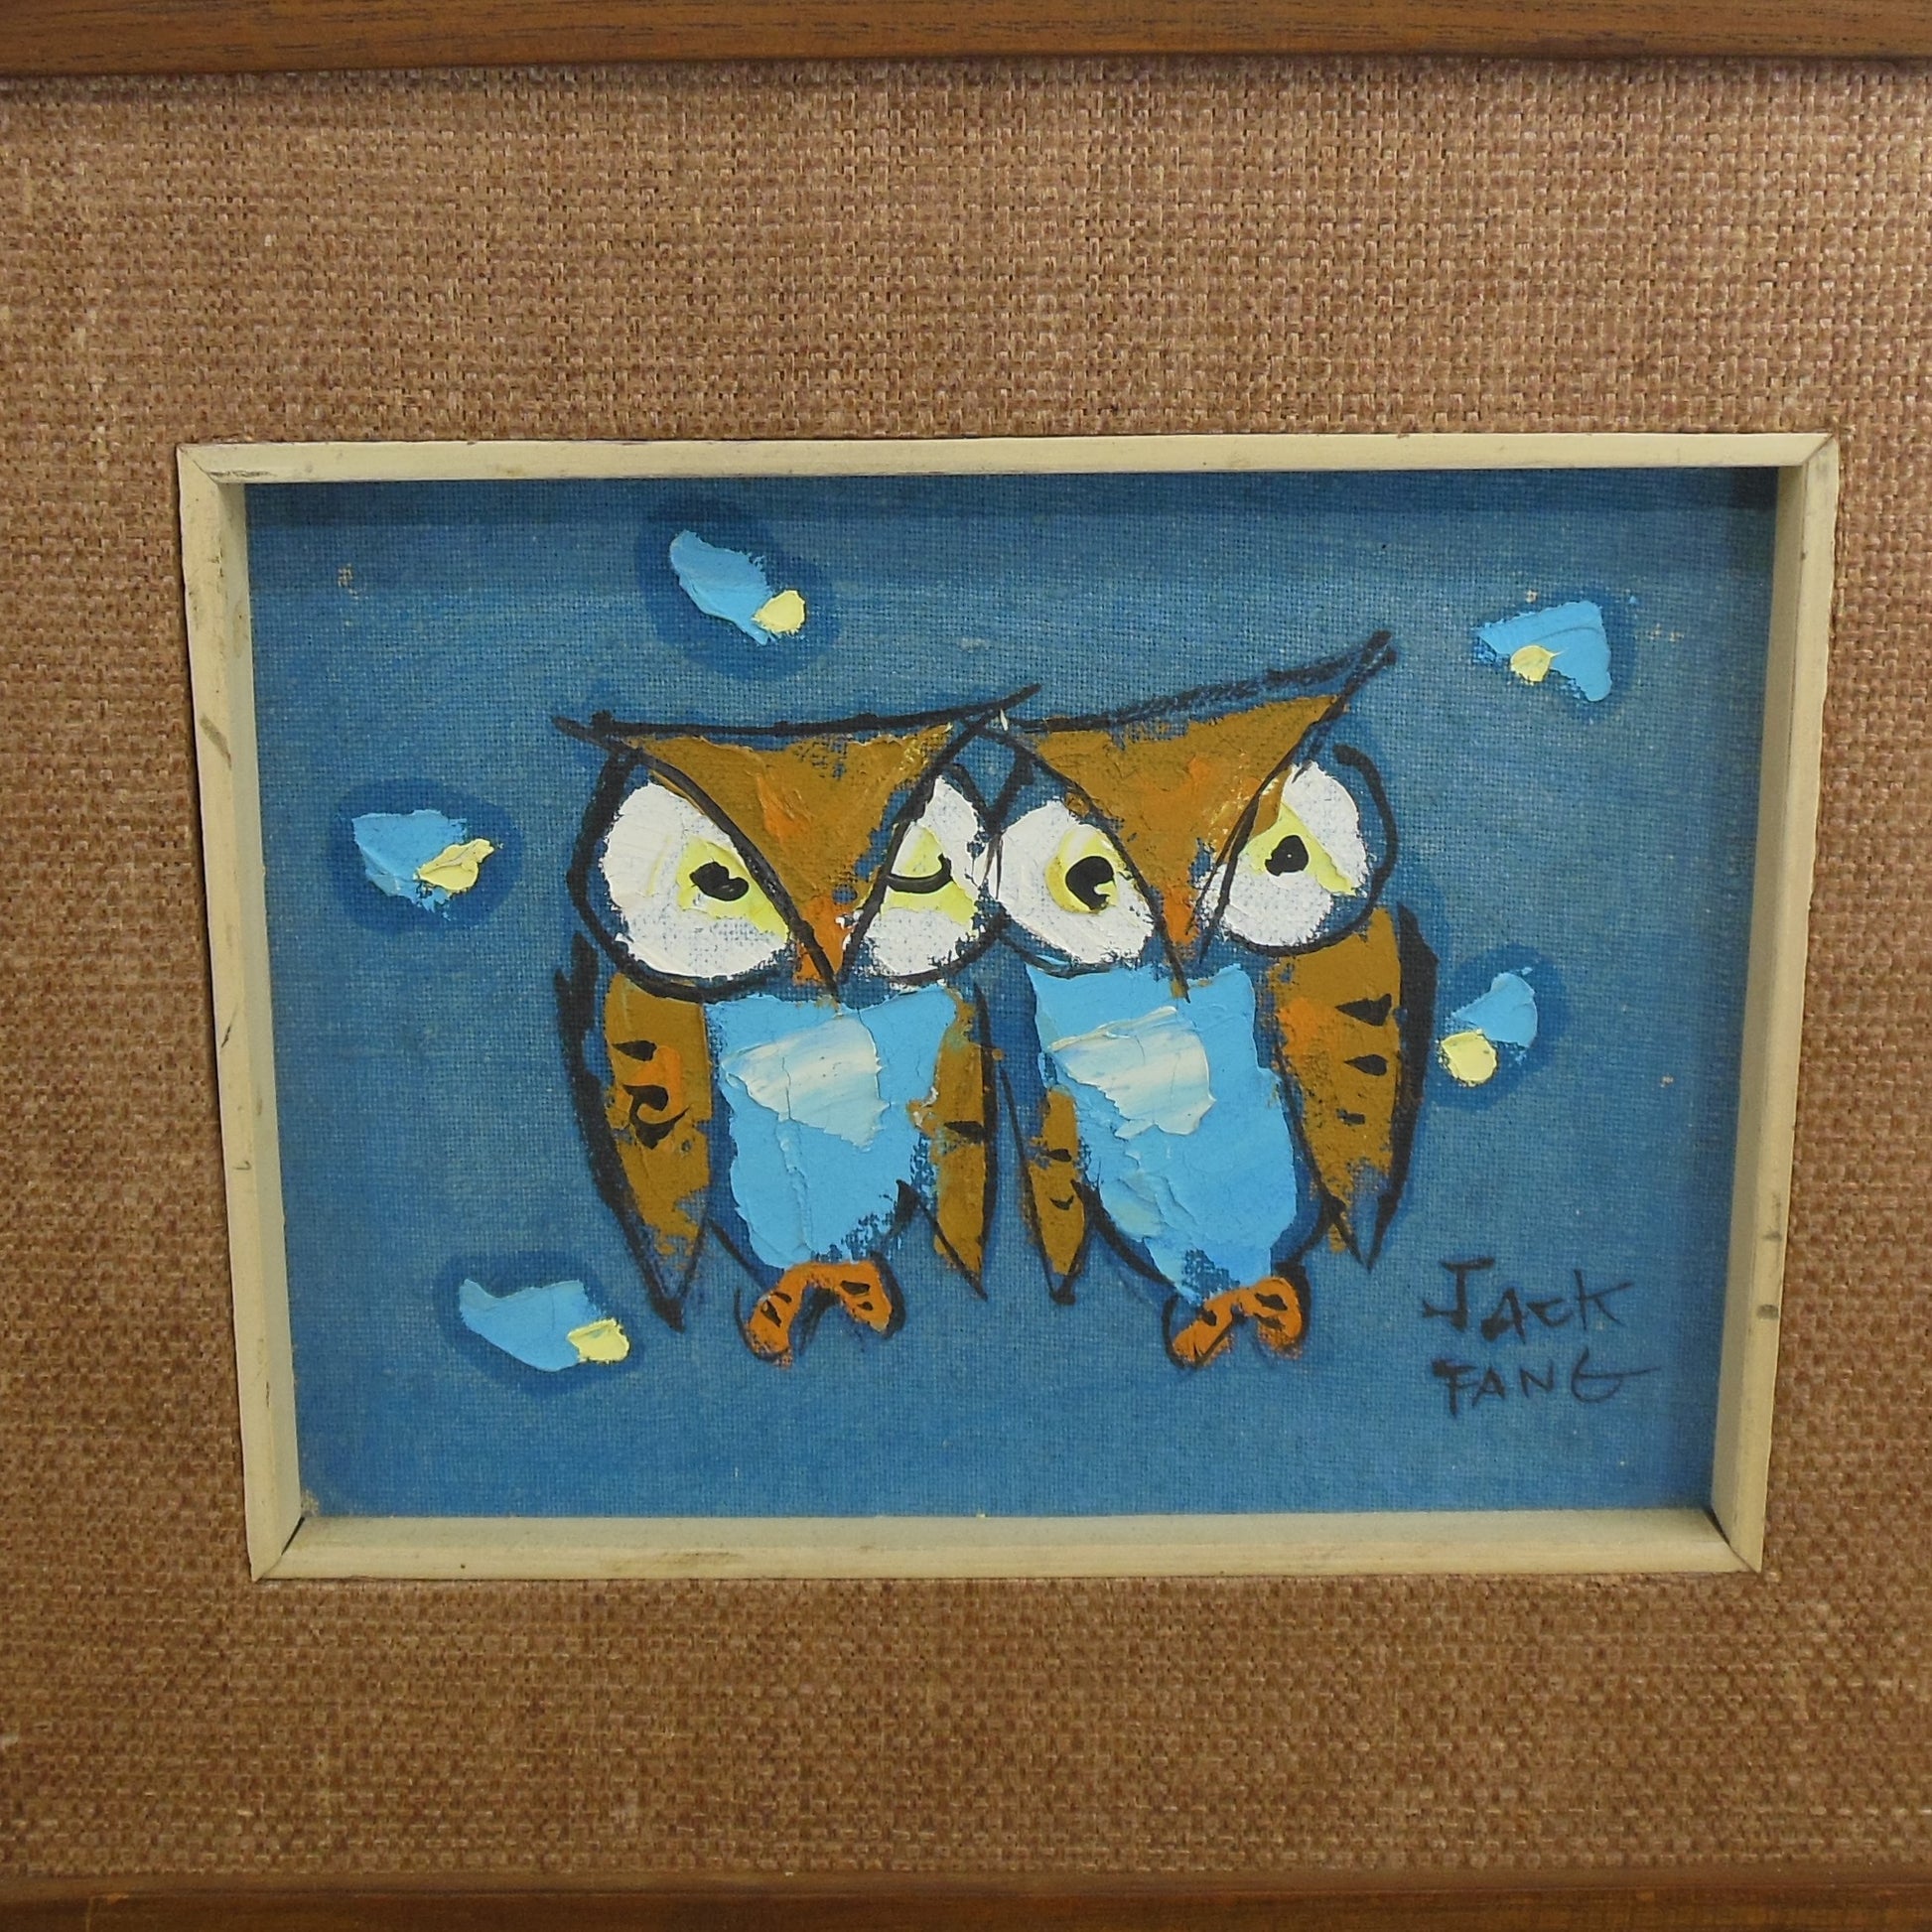 Jack Fang 1960's Whimsical Animal Paintings Goat Pig Cat Owls Vintage